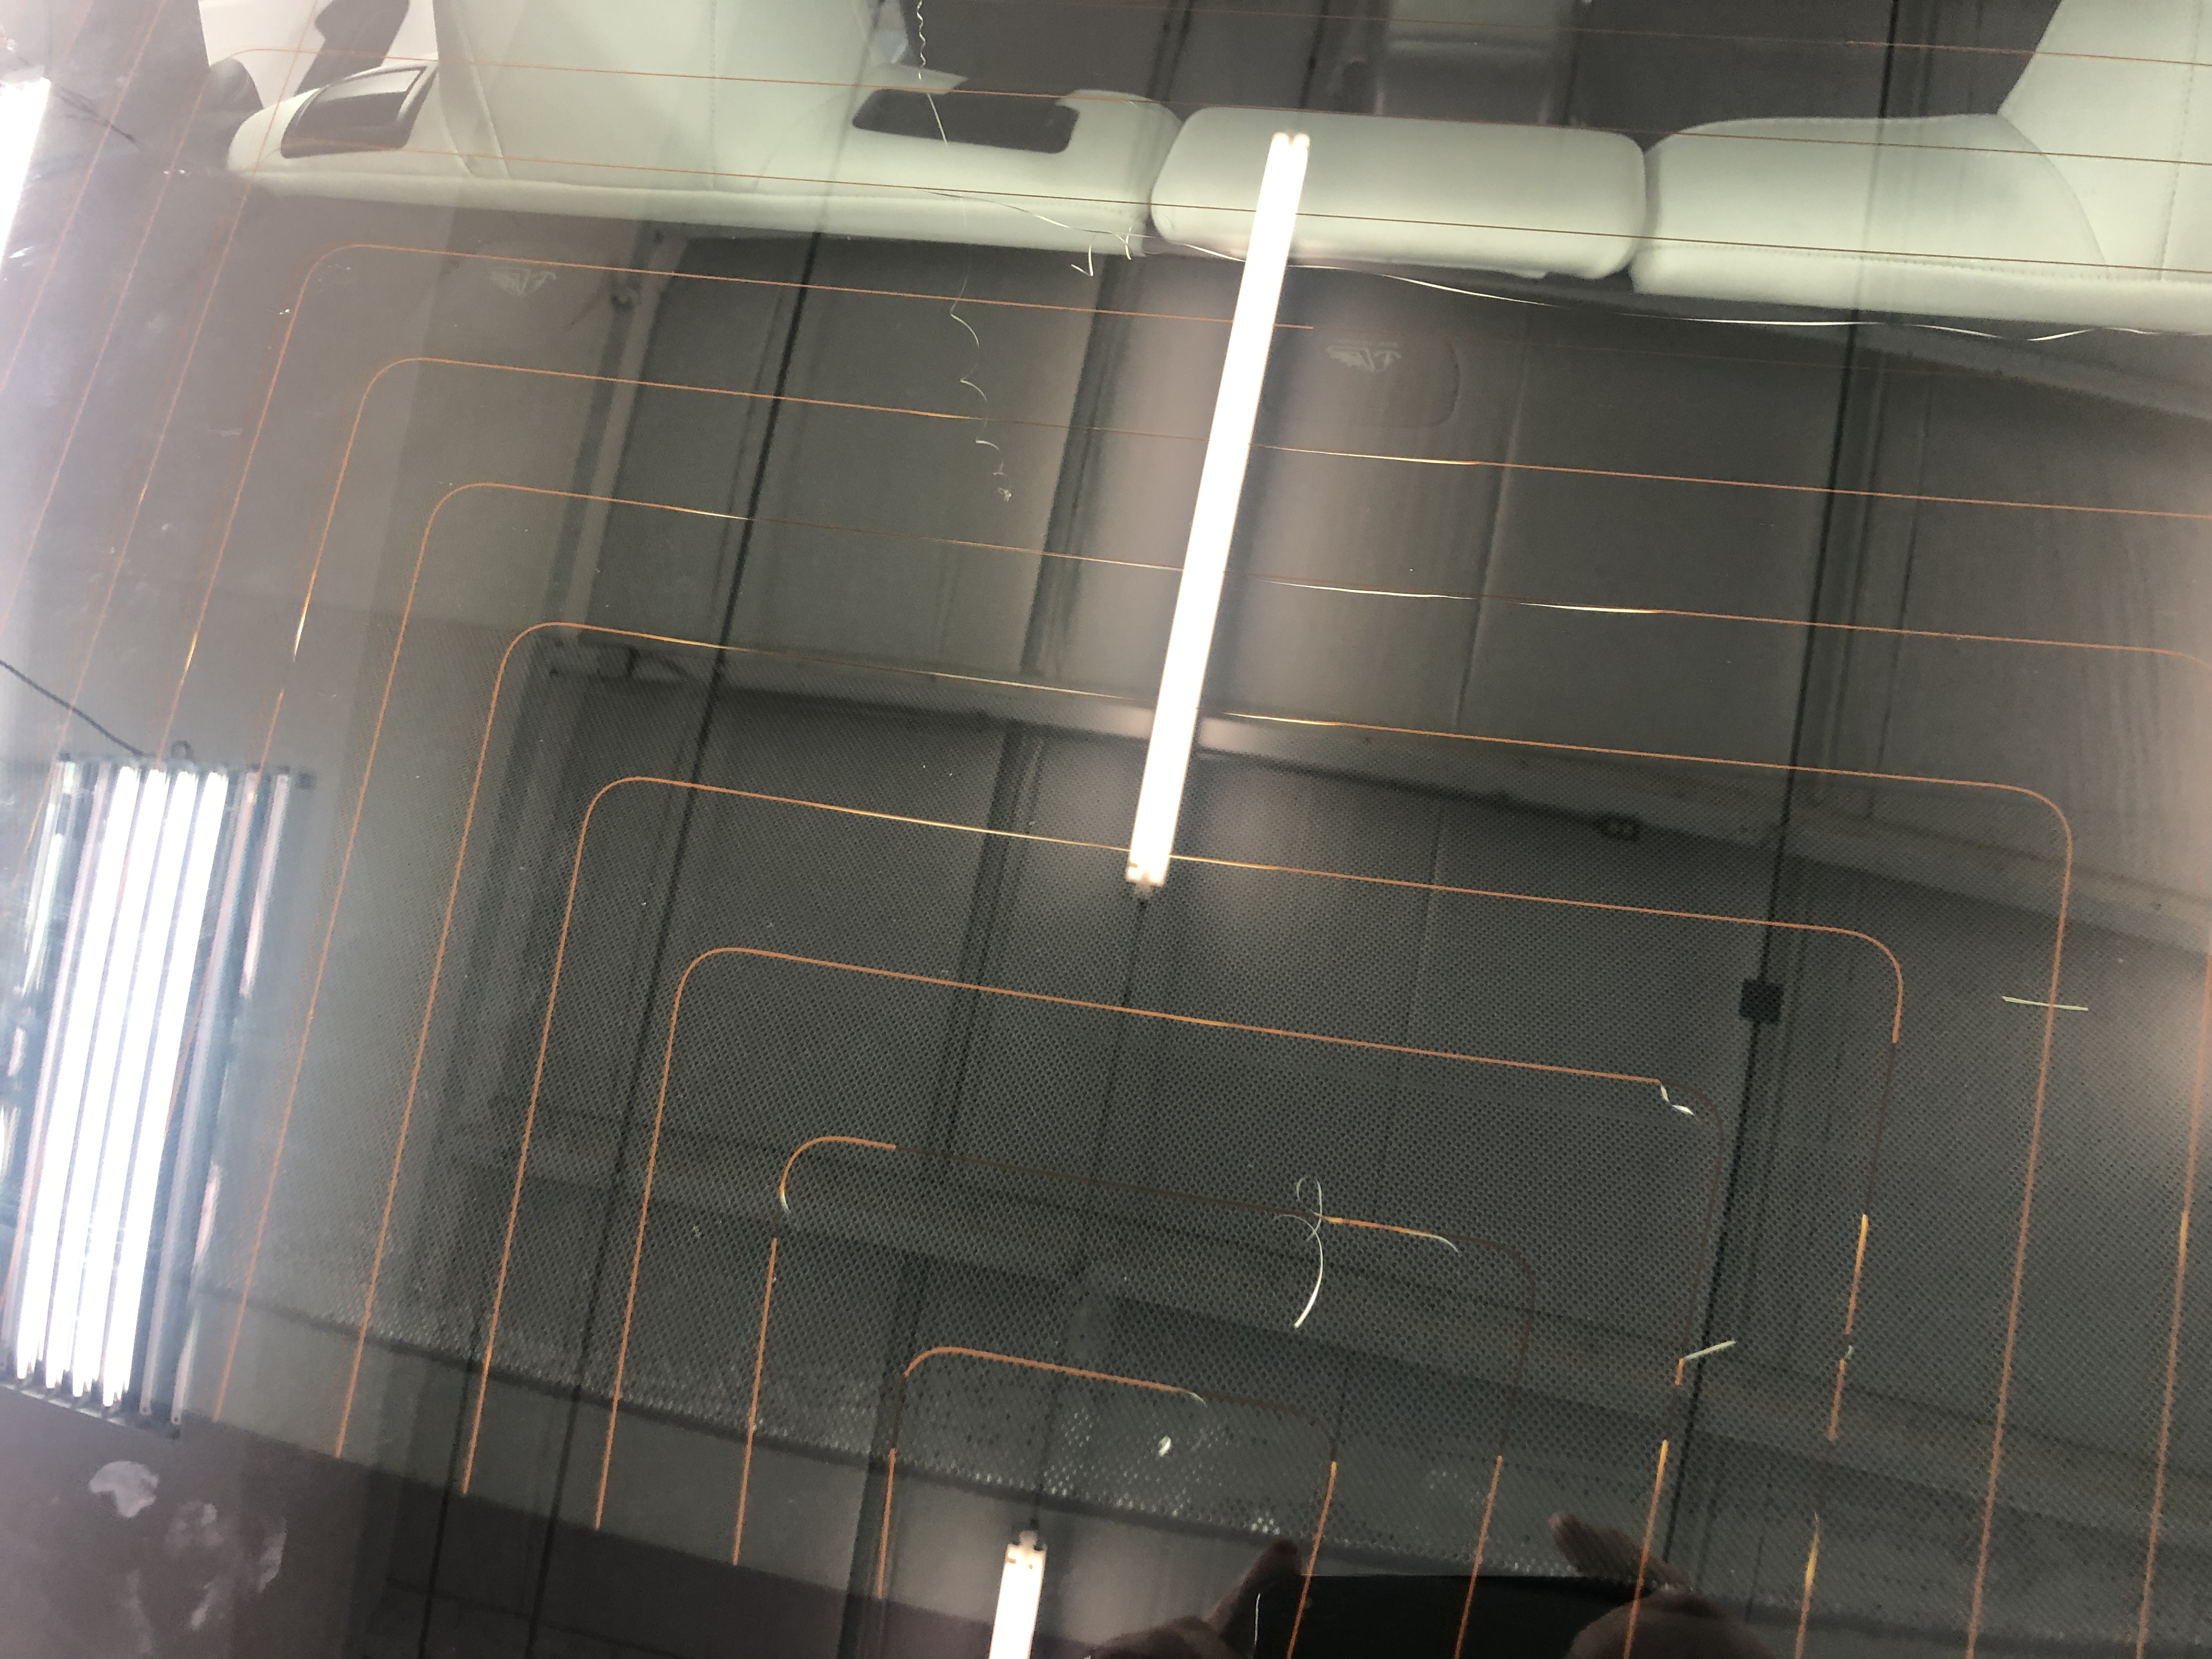 How to Remove Rear Window Tint